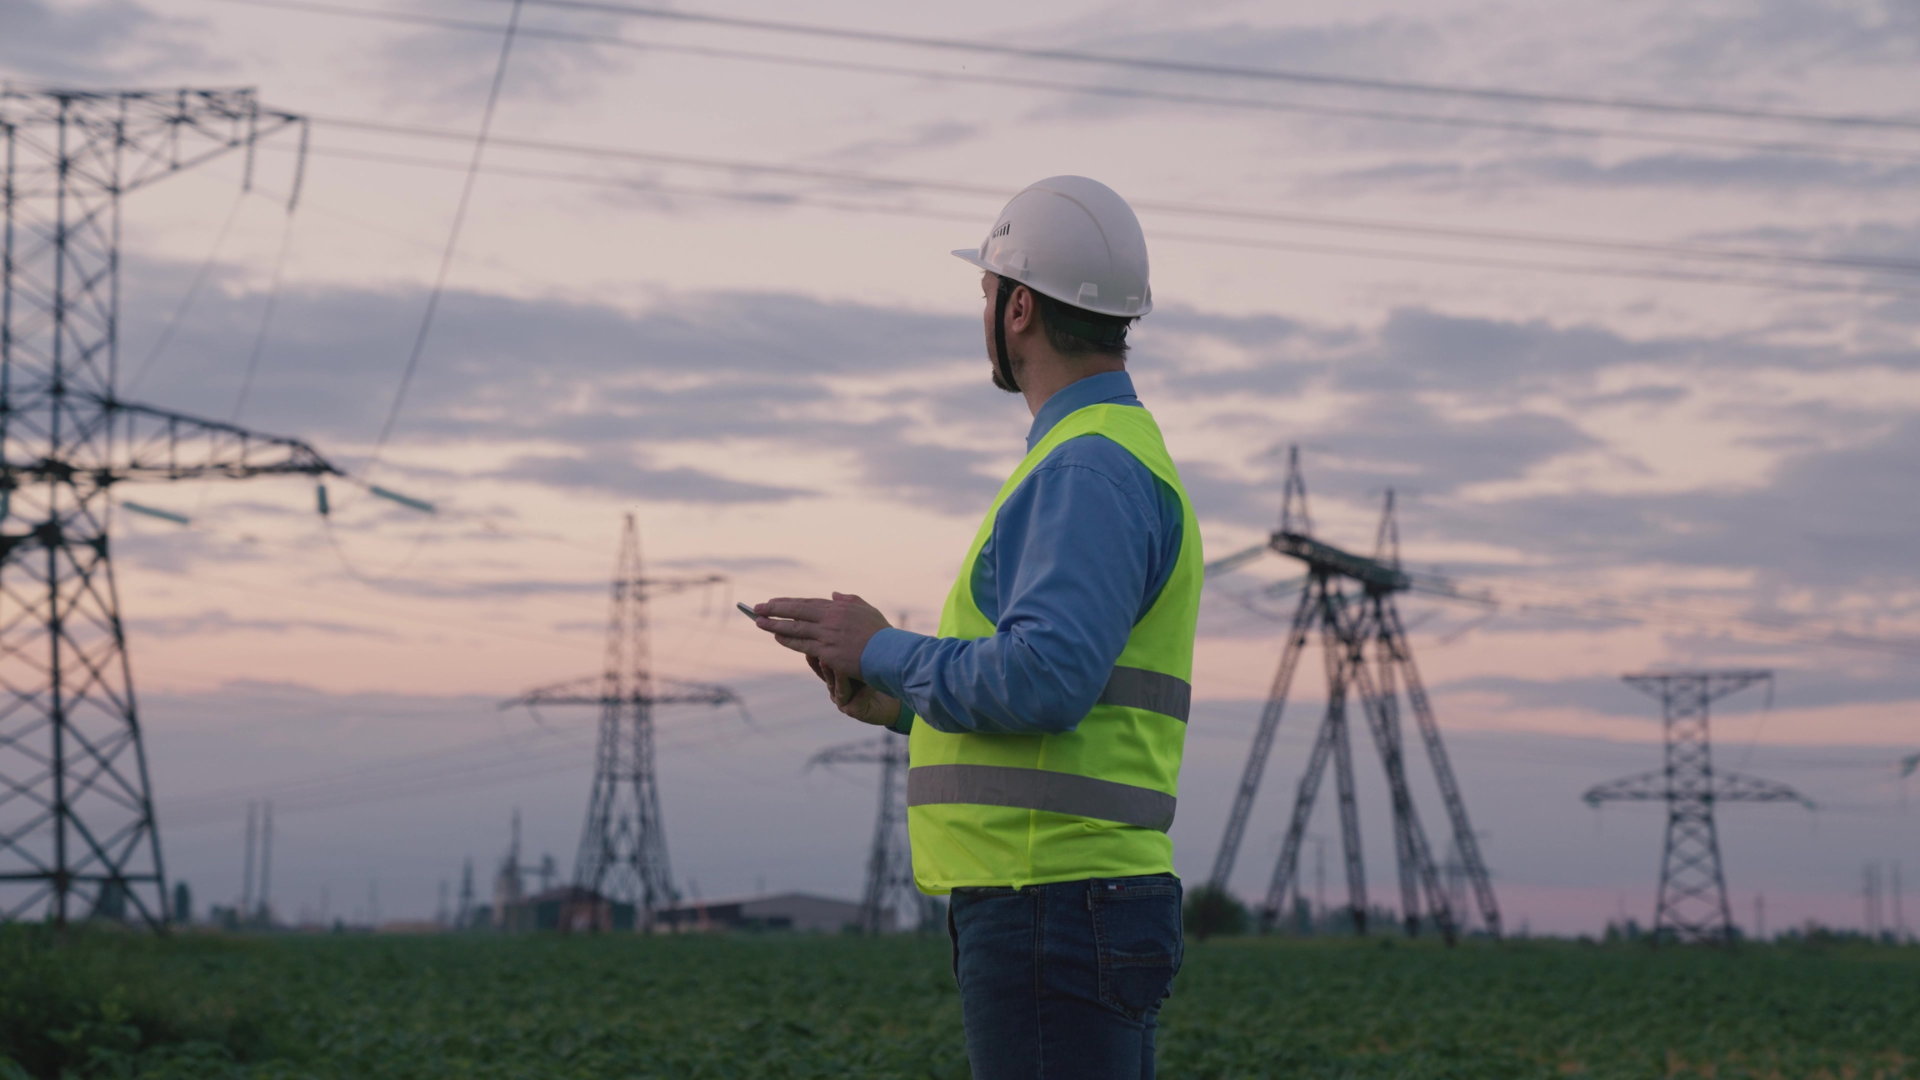 An engineer in a reflective vest and helmet stands in a field at dusk, holding a tablet with high-voltage power lines and pylons in the background.